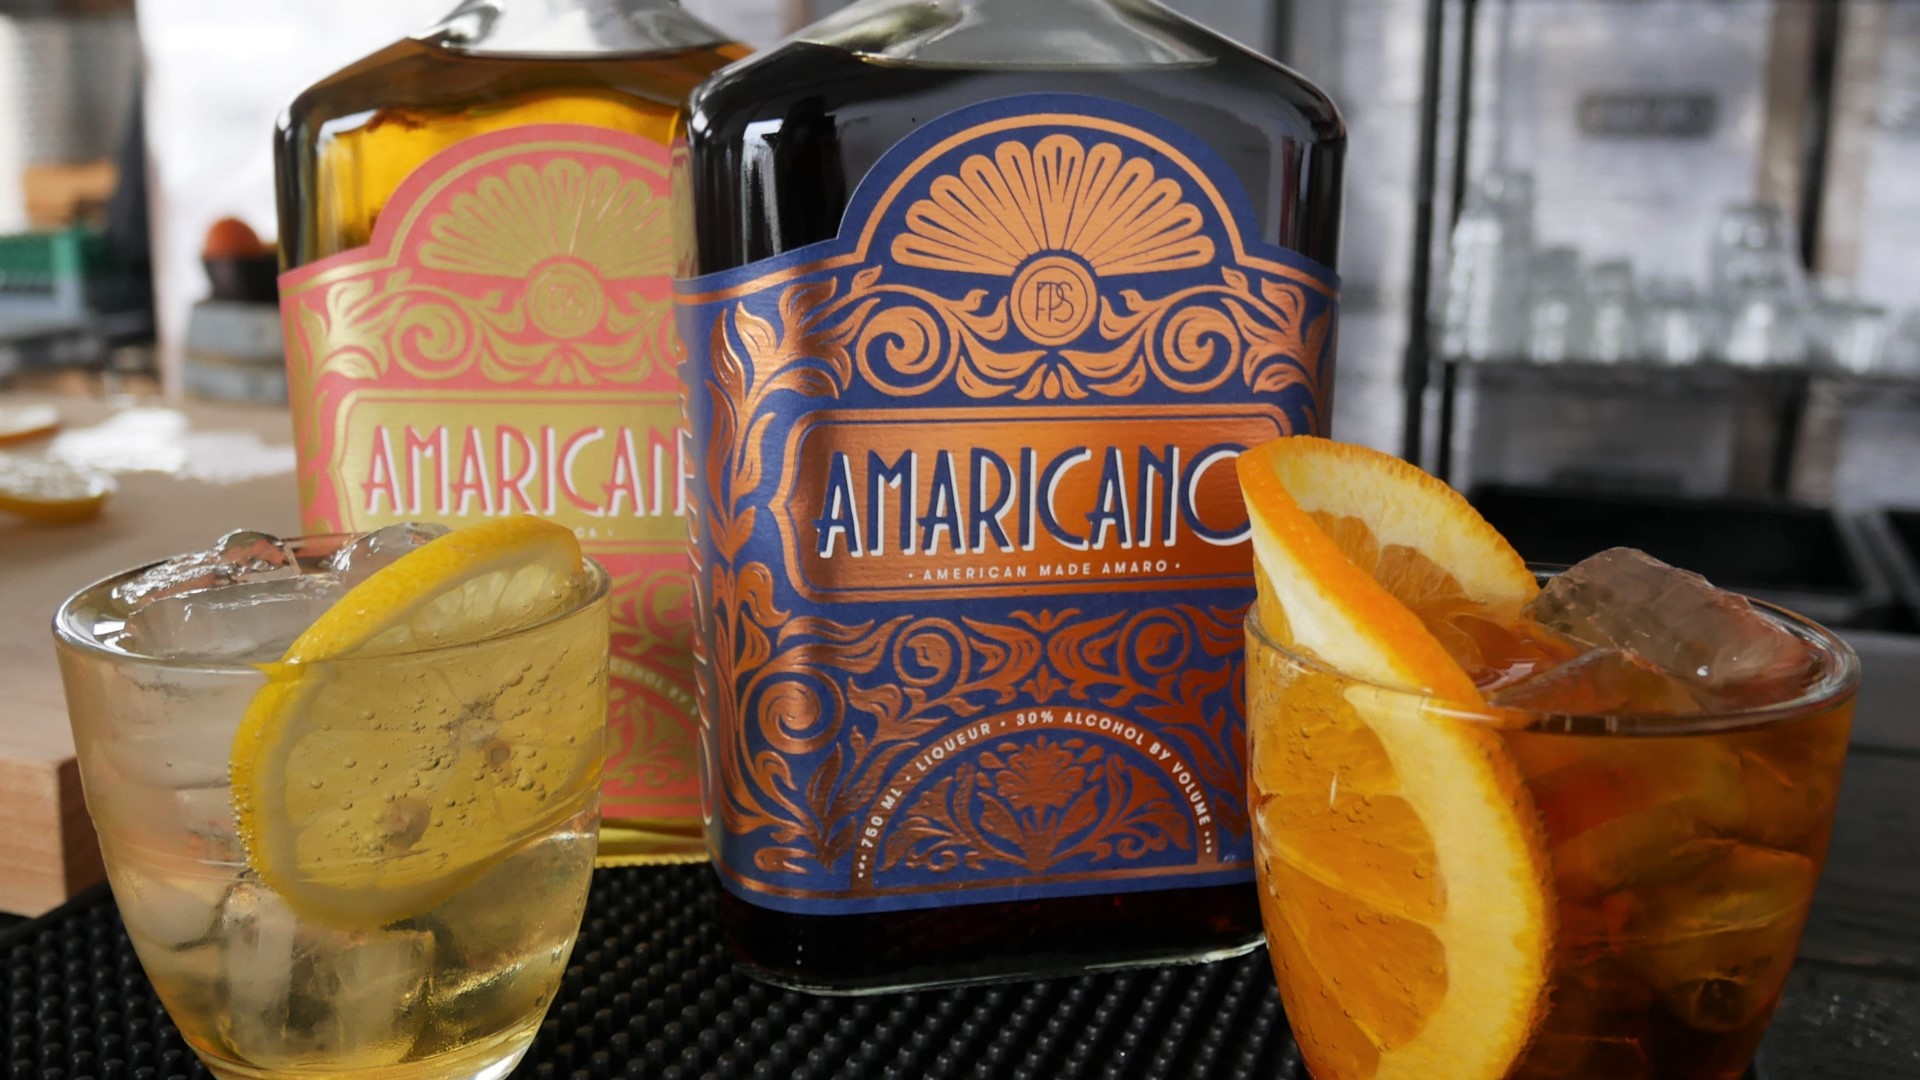 Amaricano, made by Fast Penny Spirits, is a kind of Italian amaro - and perfect for summer sipping. #k5evening